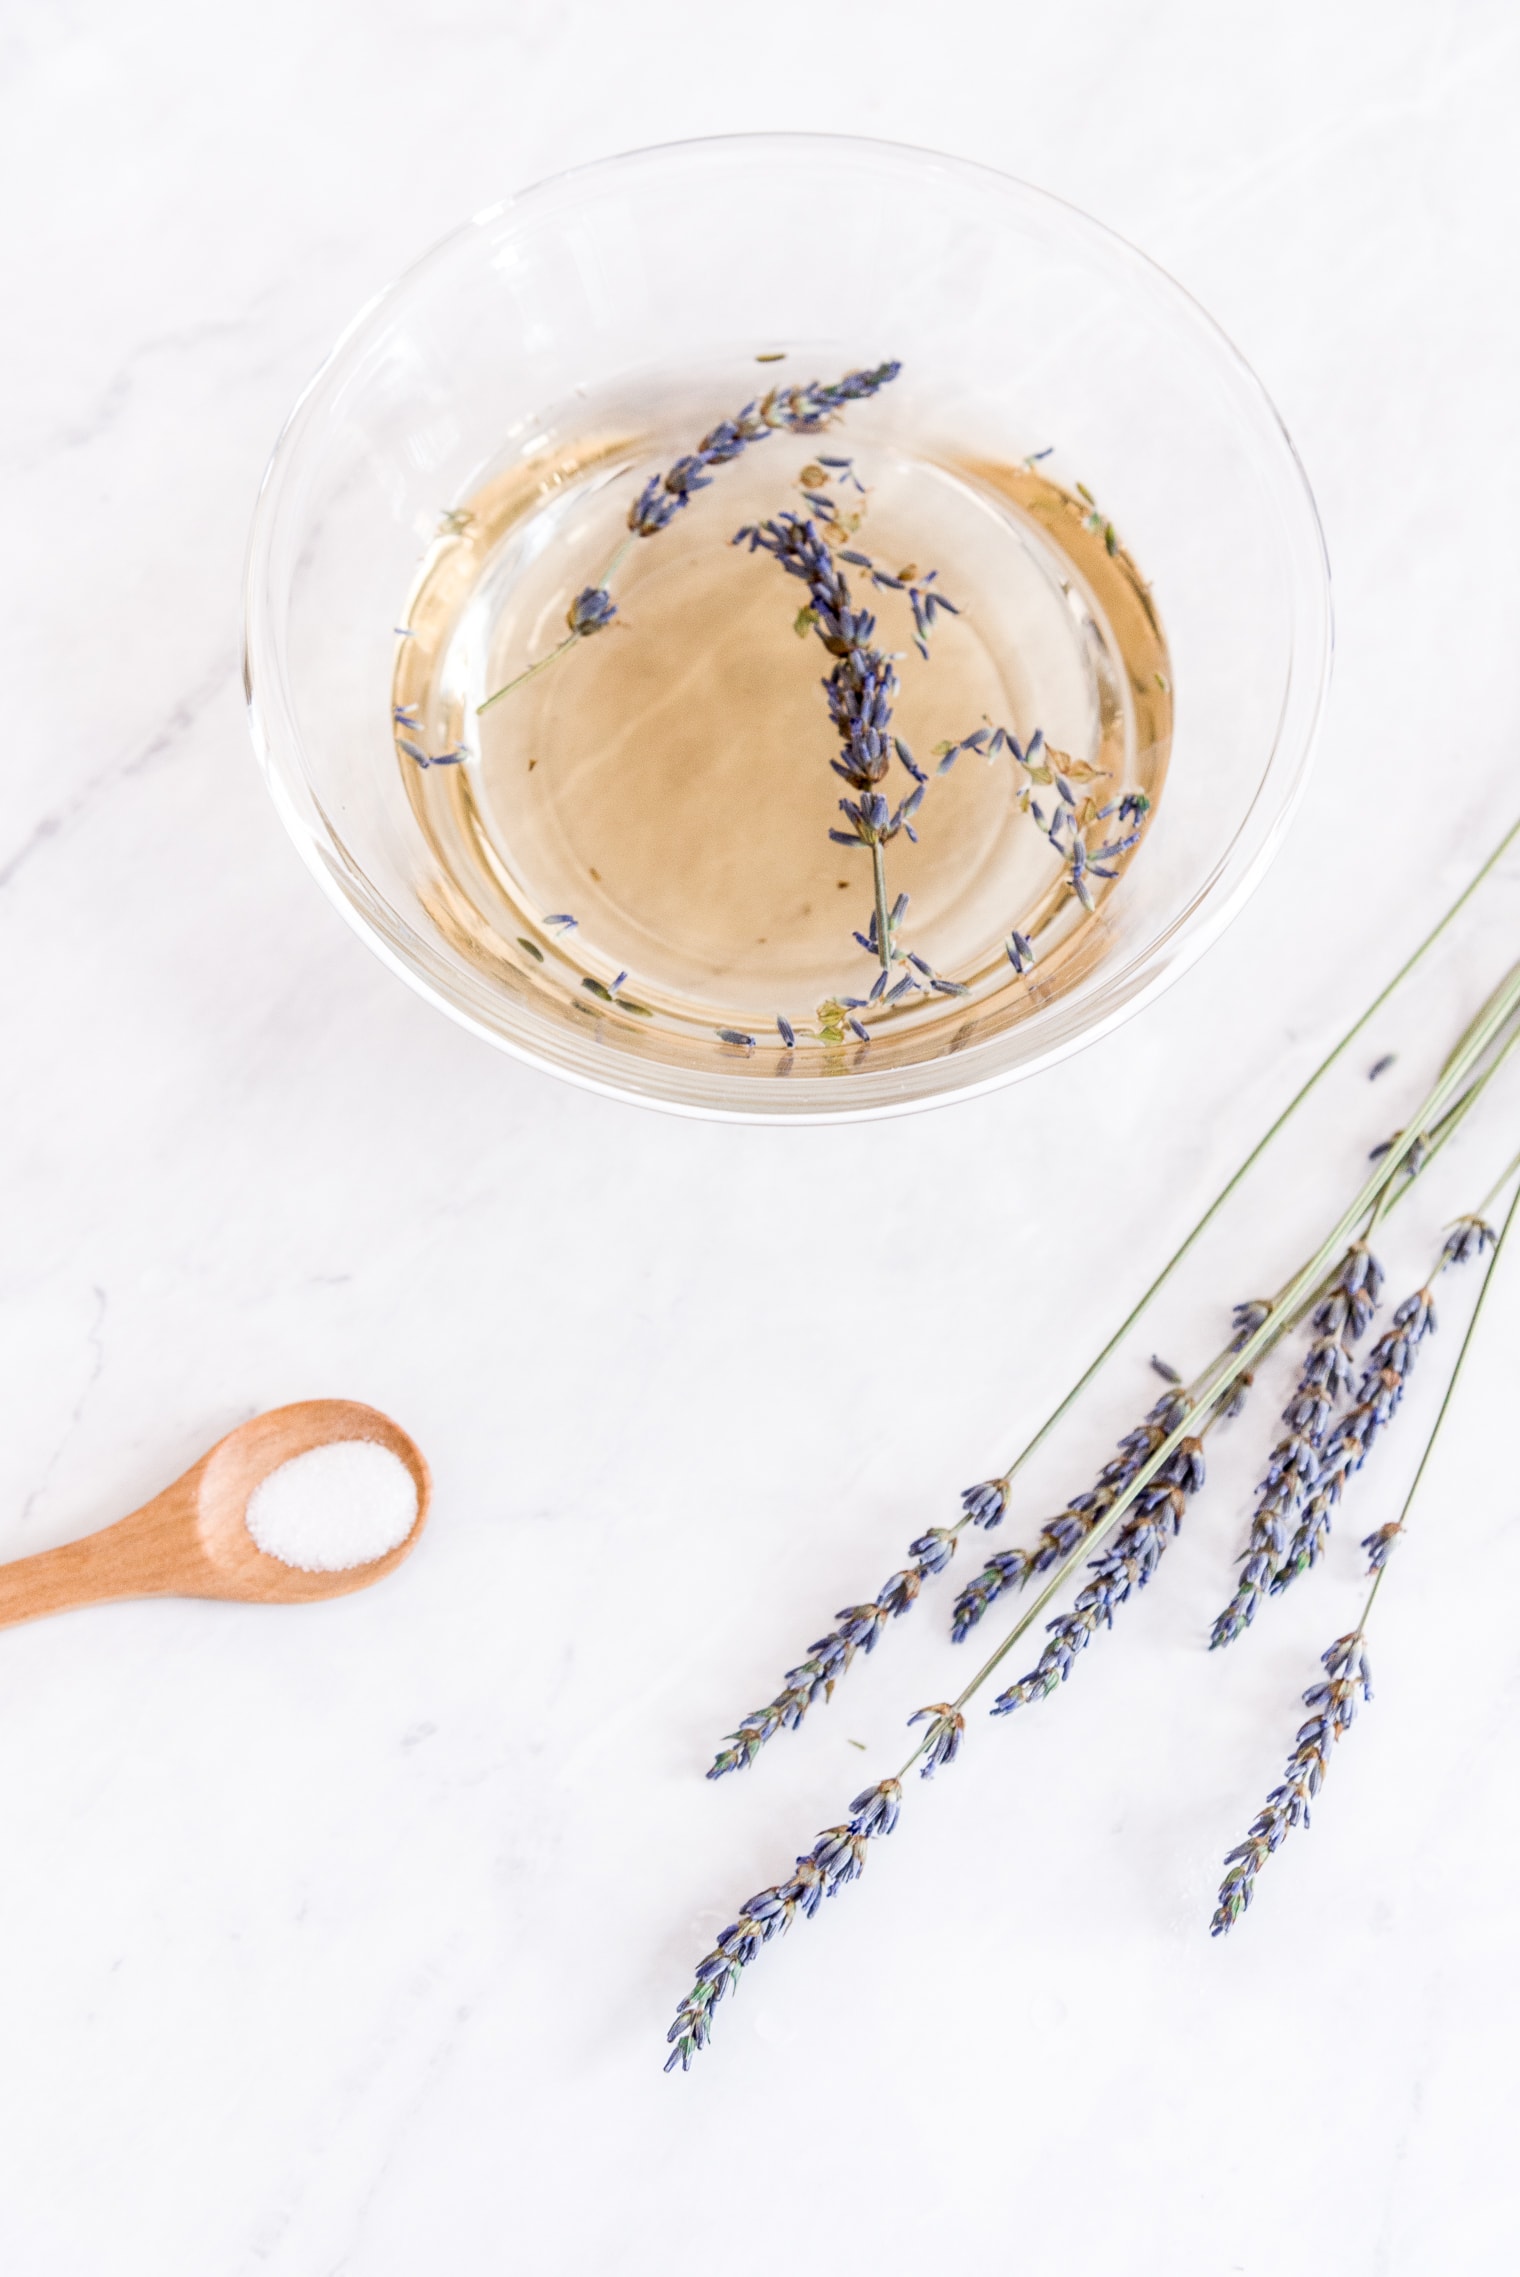 How to Make Lavender Simple Syrup